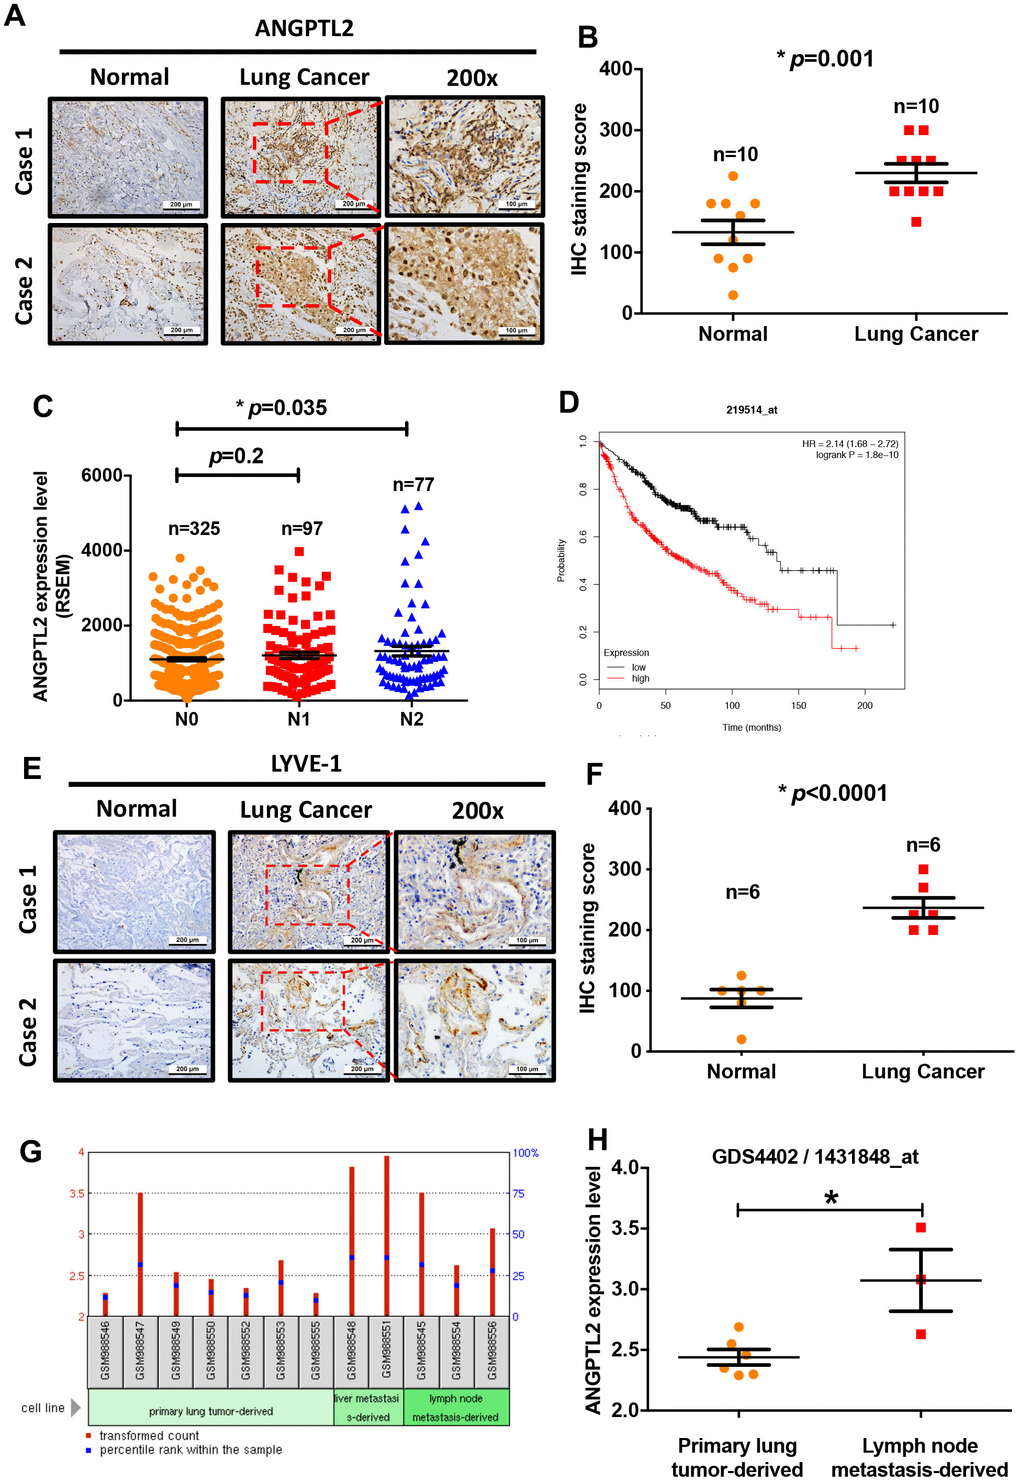 Levels of ANGPTL2 expression correlate with clinicopathologic features of lung adenocarcinoma tissue infiltrated by lymphatic vessels. (A, B) ANGPTL2 expression in human lung cancer tissue and adjacent normal tissue samples was analyzed by IHC staining. (C) The association between ANGPTL2 expression and regional lymph node metastasis was analyzed in samples from the TCGA database. (D) Associations between ANGPTL2 expression and overall survival rates of lung cancer patients were analyzed using the Kaplan-Meier Plotter database. (E, F) LYVE-1 expression in human lung cancer tissue and adjacent normal tissue samples was analyzed by IHC staining. (G, H) Data obtained from the GEO database (GDS4402/1431848